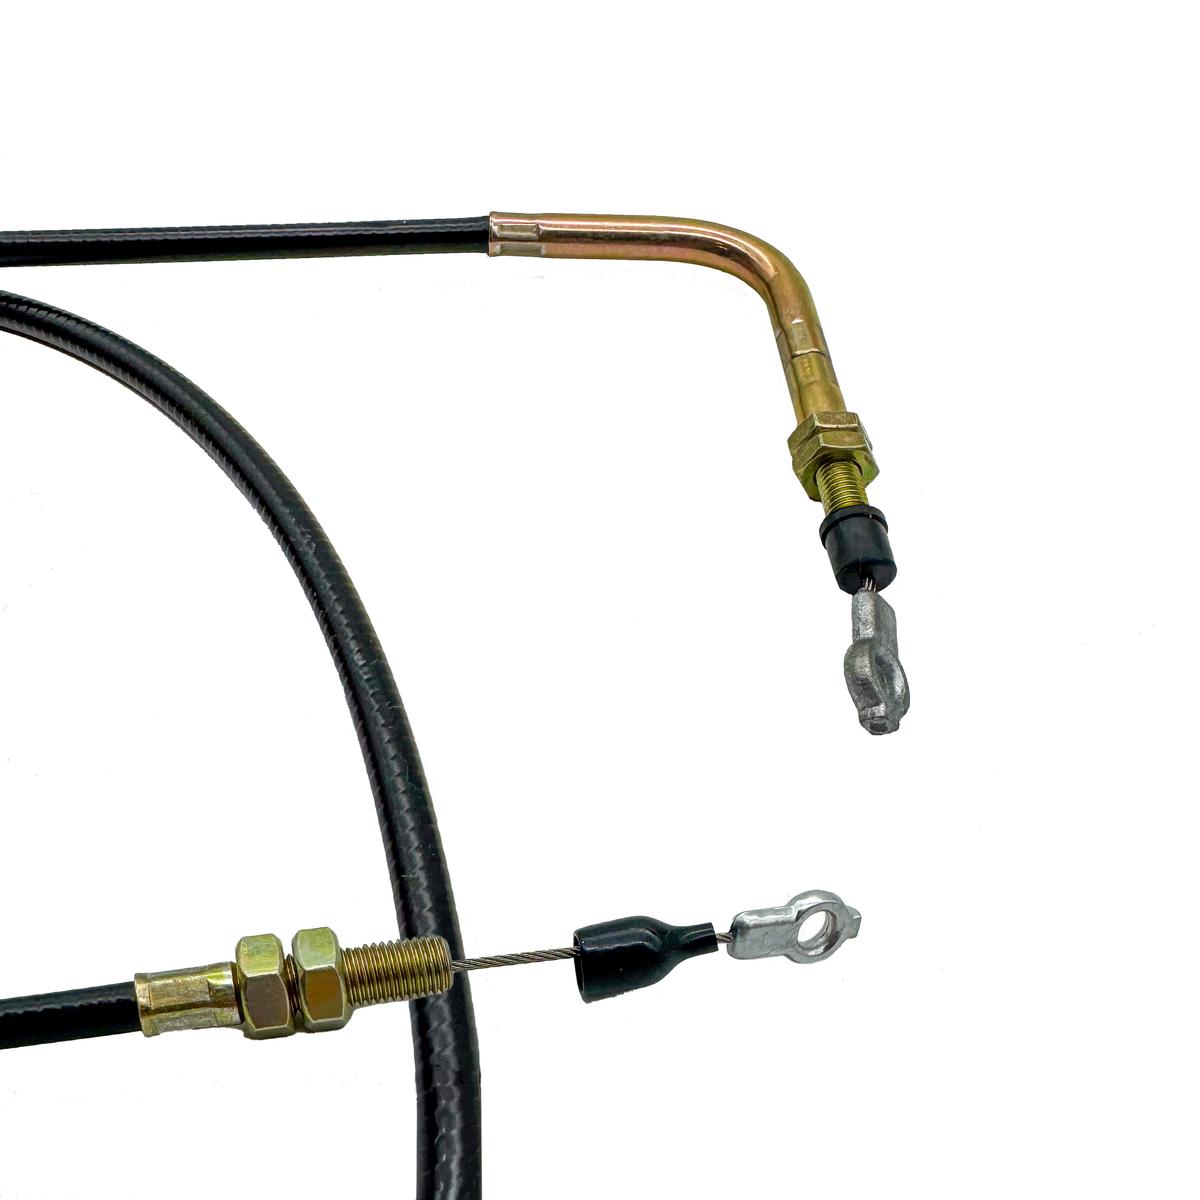 EZGO Throttle Cable (Years 1989-1993)